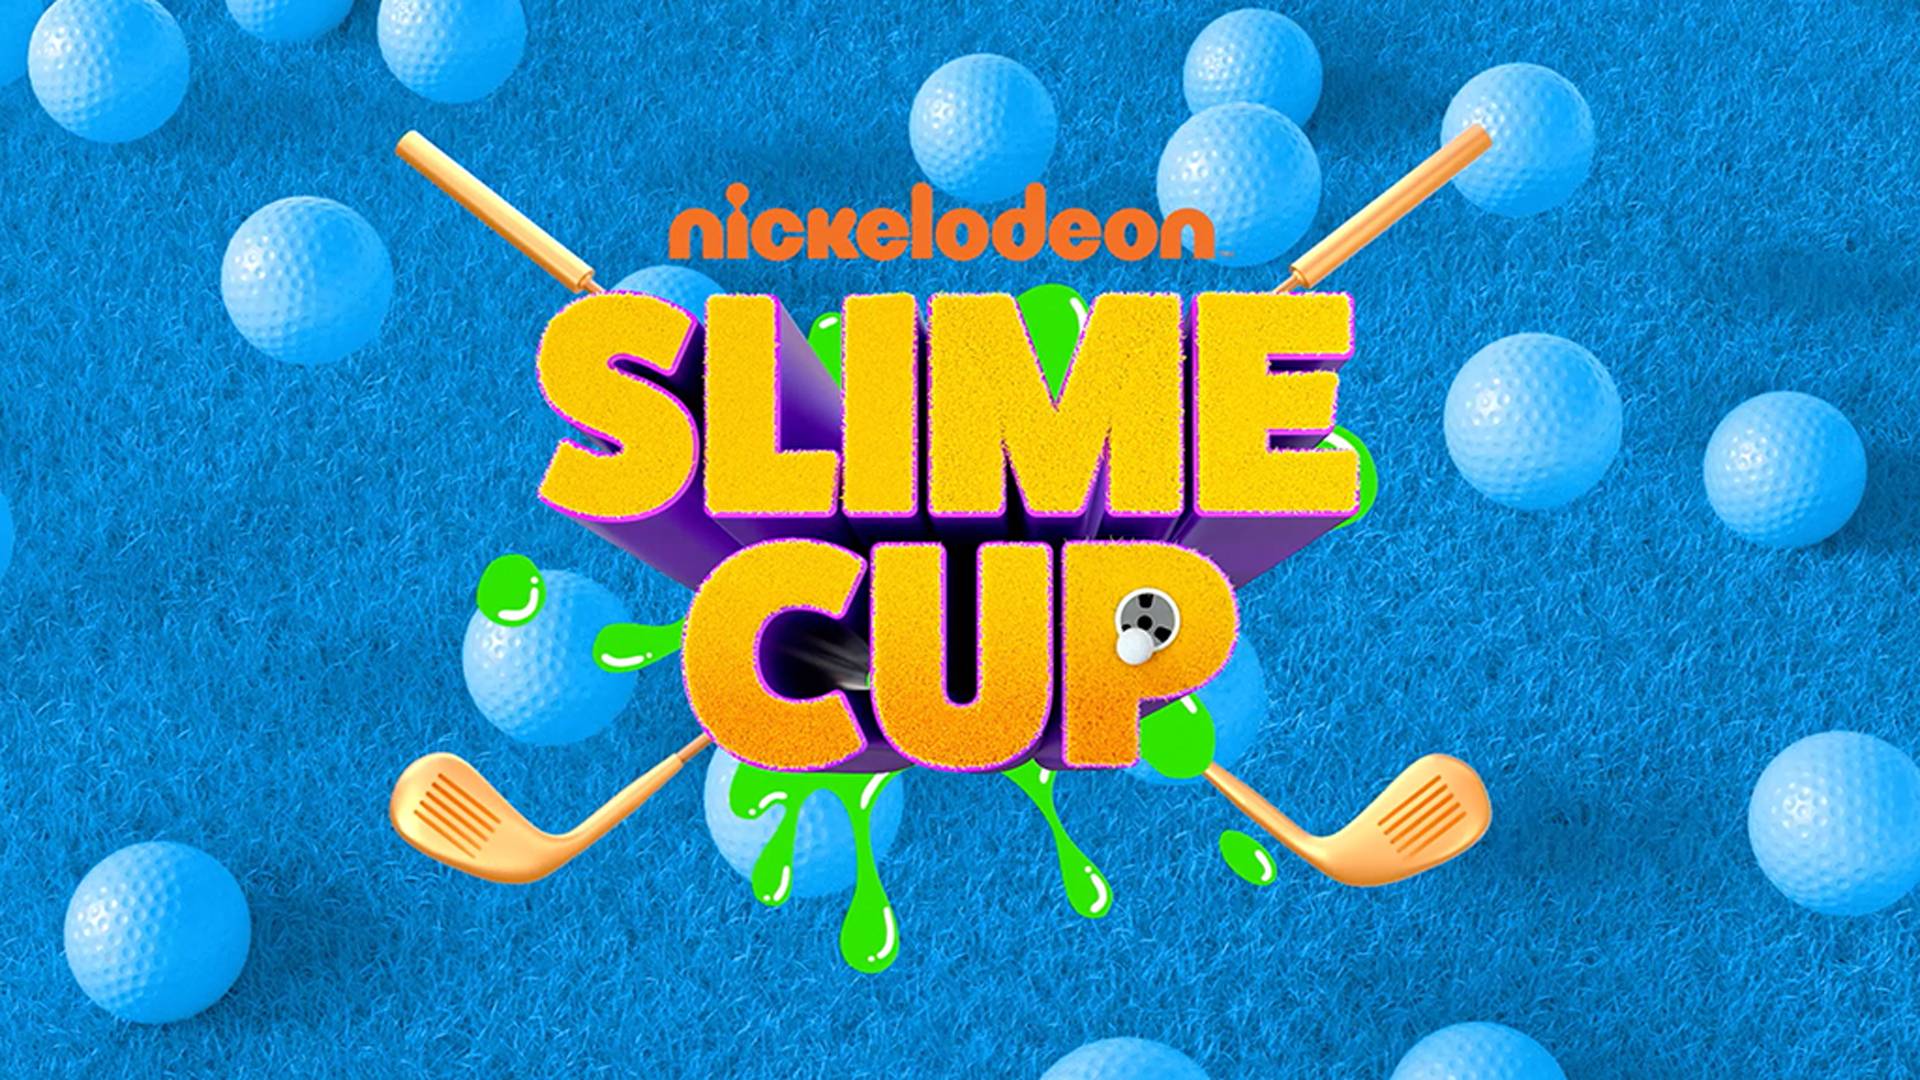 How to watch the Nickelodeon Slime Cup on Saturday, June 25, stream for free online, find local channel